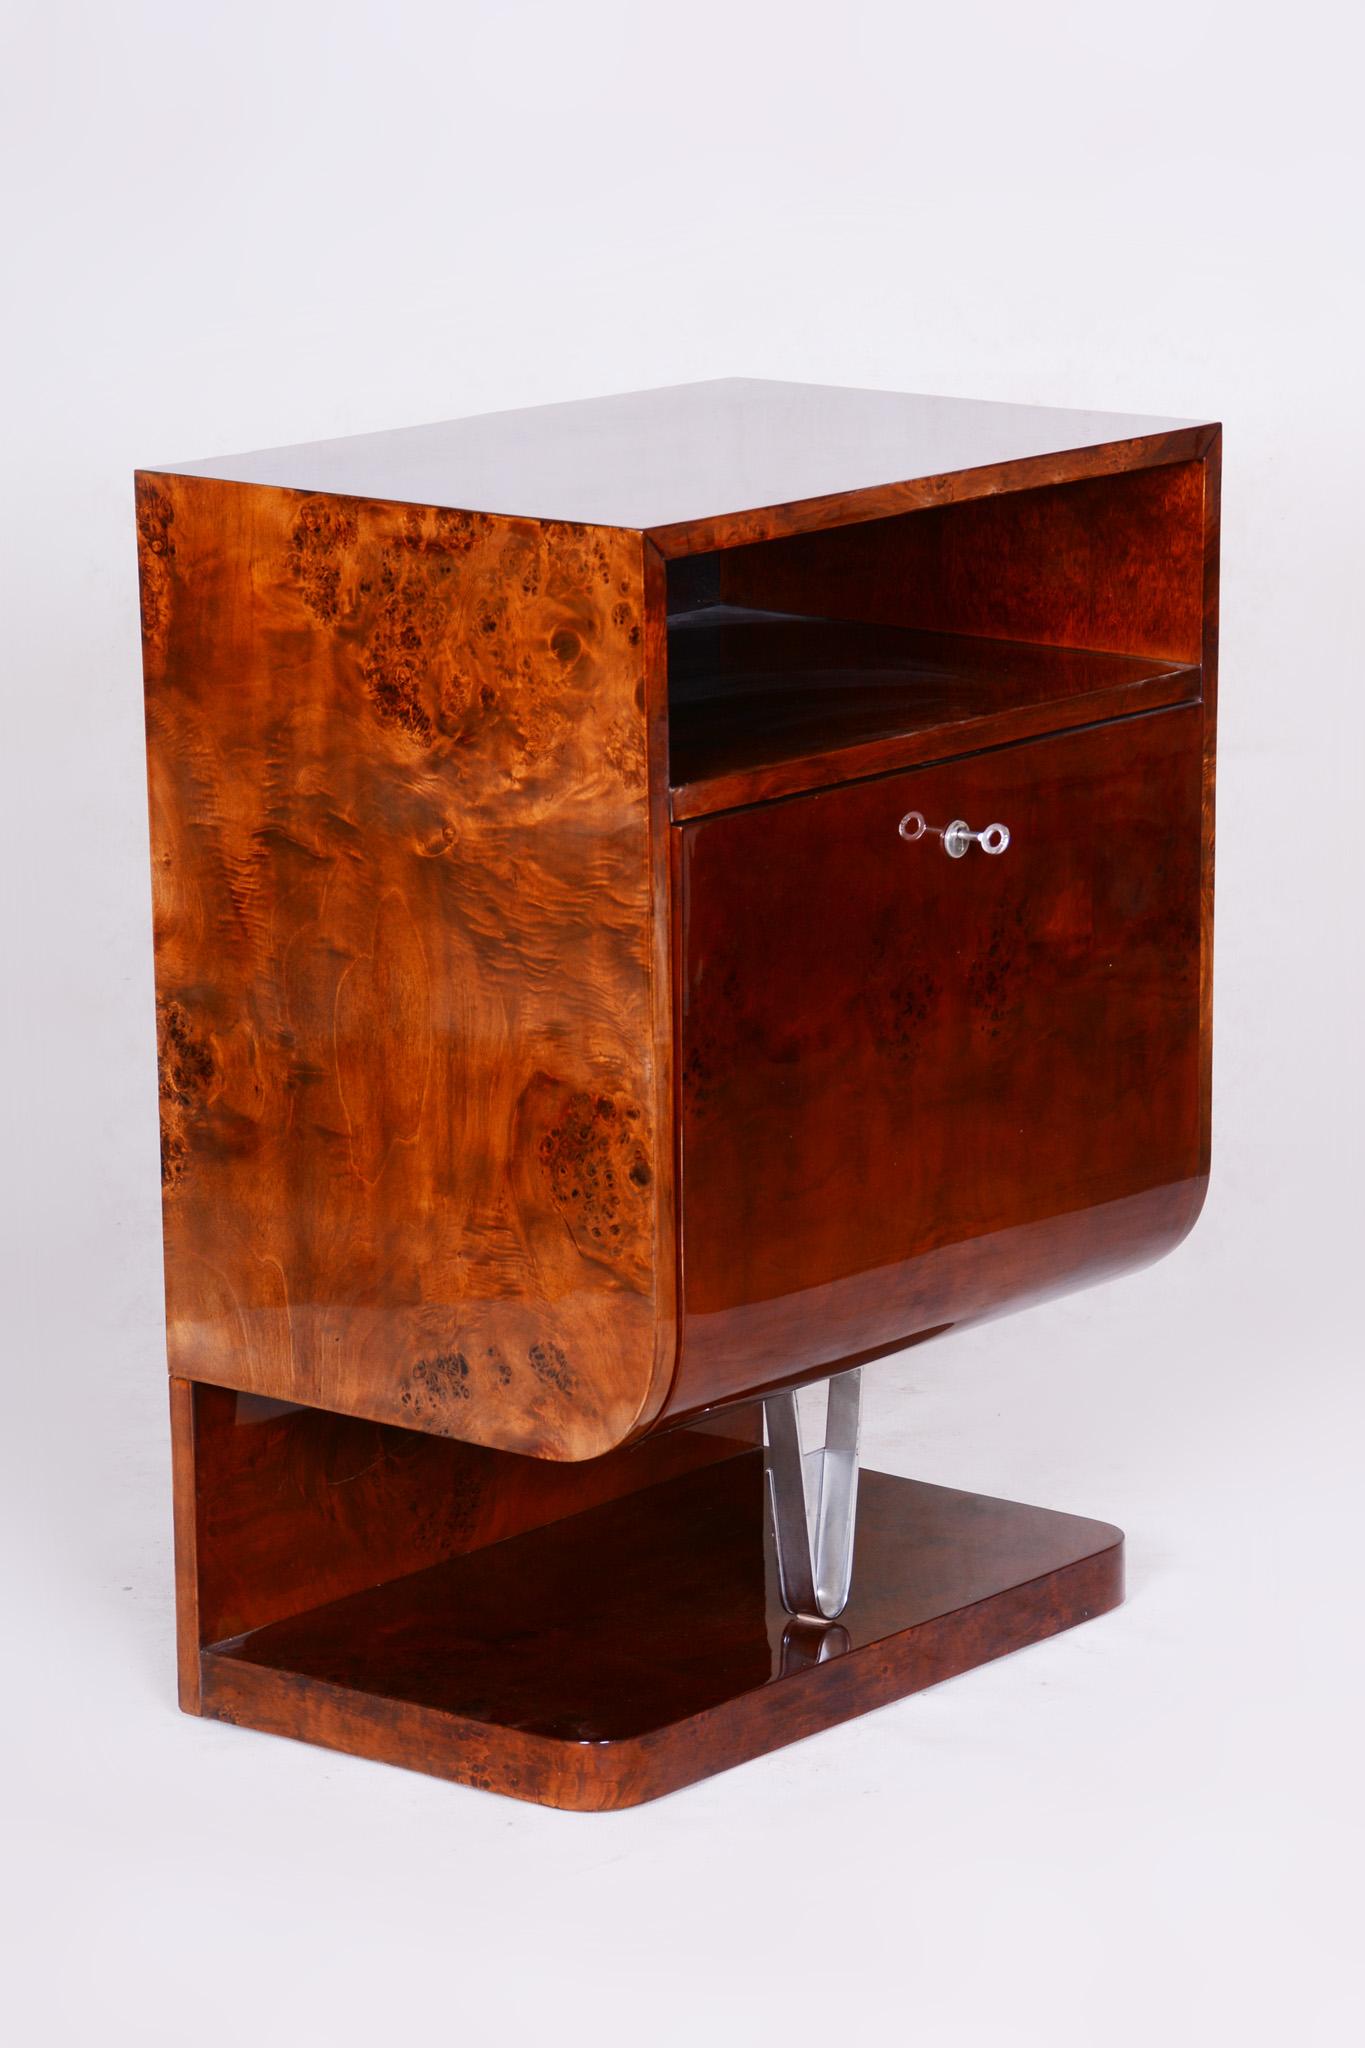 Unique Czech Art Deco Cabinet-Bar, Walnut Completely Restored to High Gloss For Sale 2